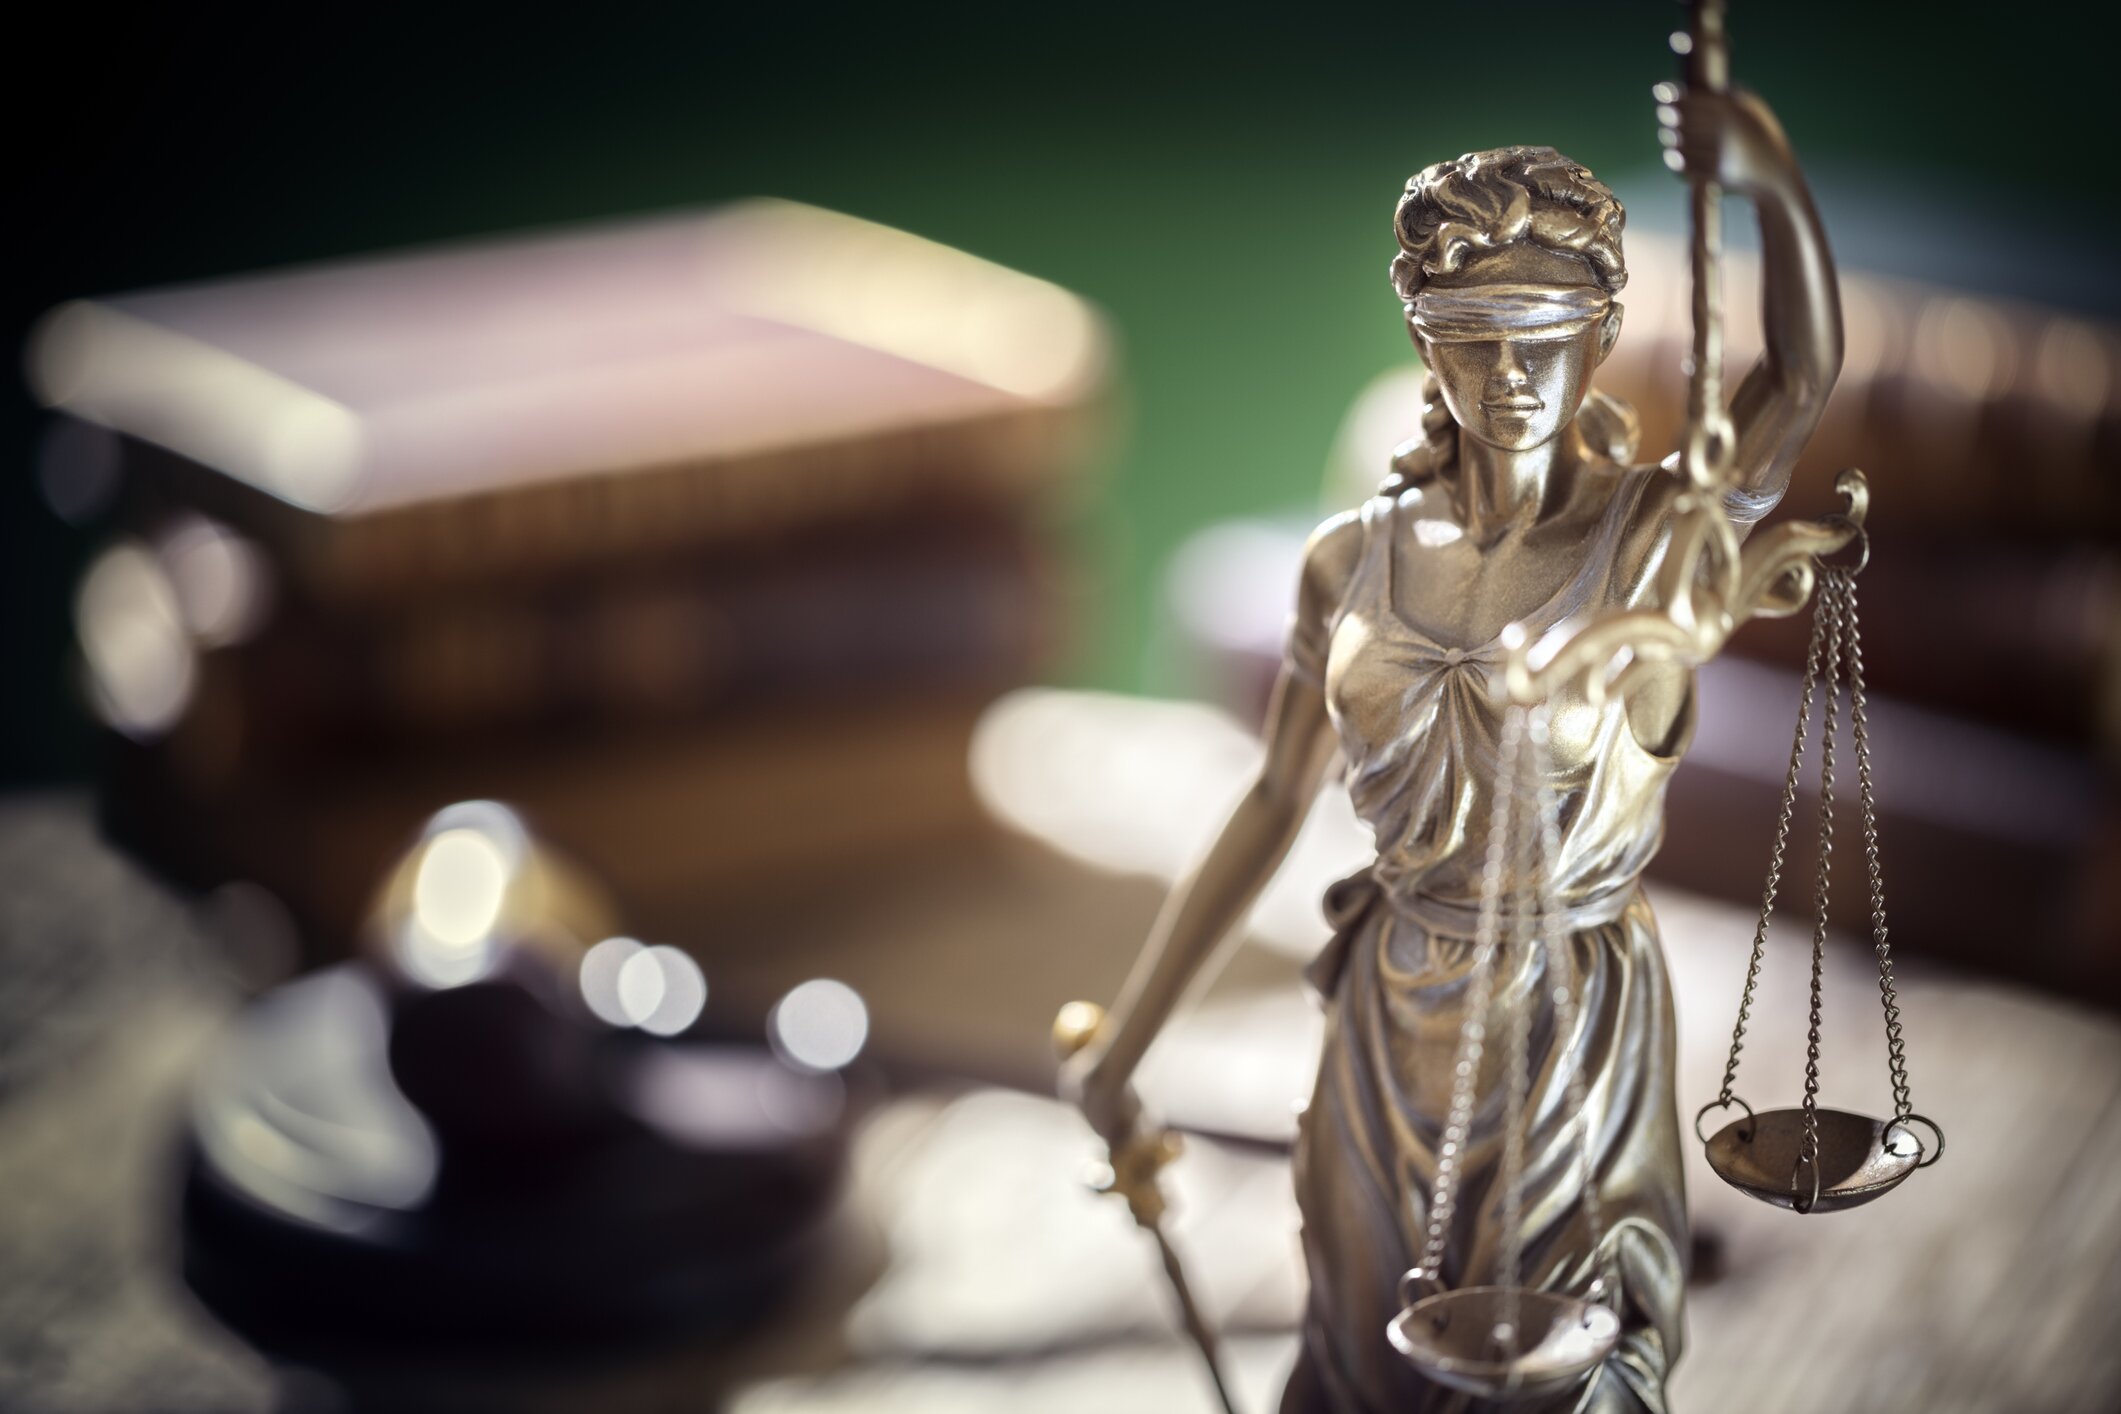 Lady justice with a gavel and books on a desk in the background